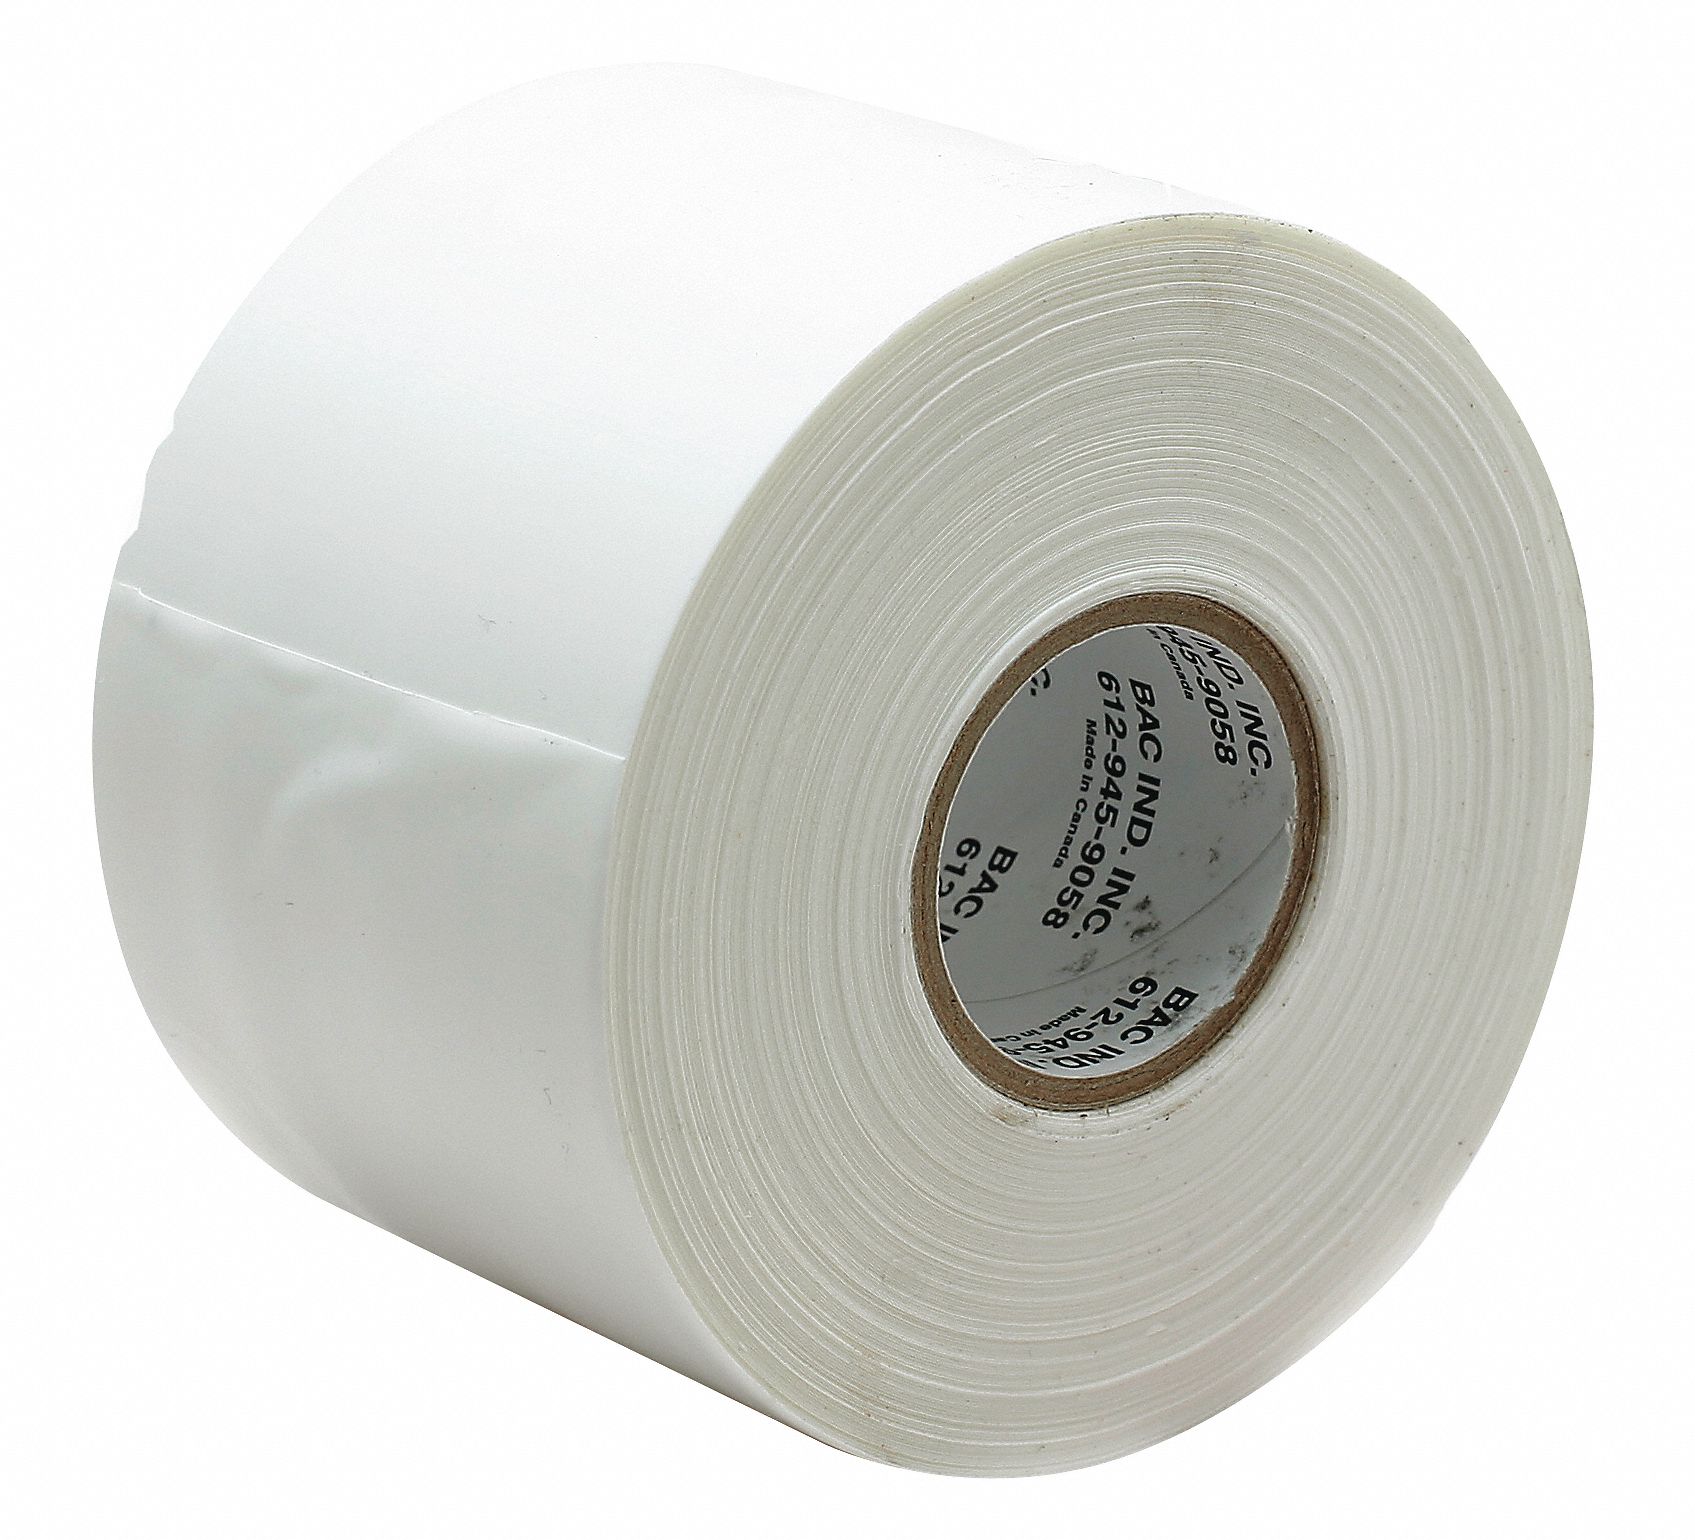 Duct Tape: BAC Industries Inc., Series TW, Light Duty, 3 in x 36 yd, White, Continuous Roll